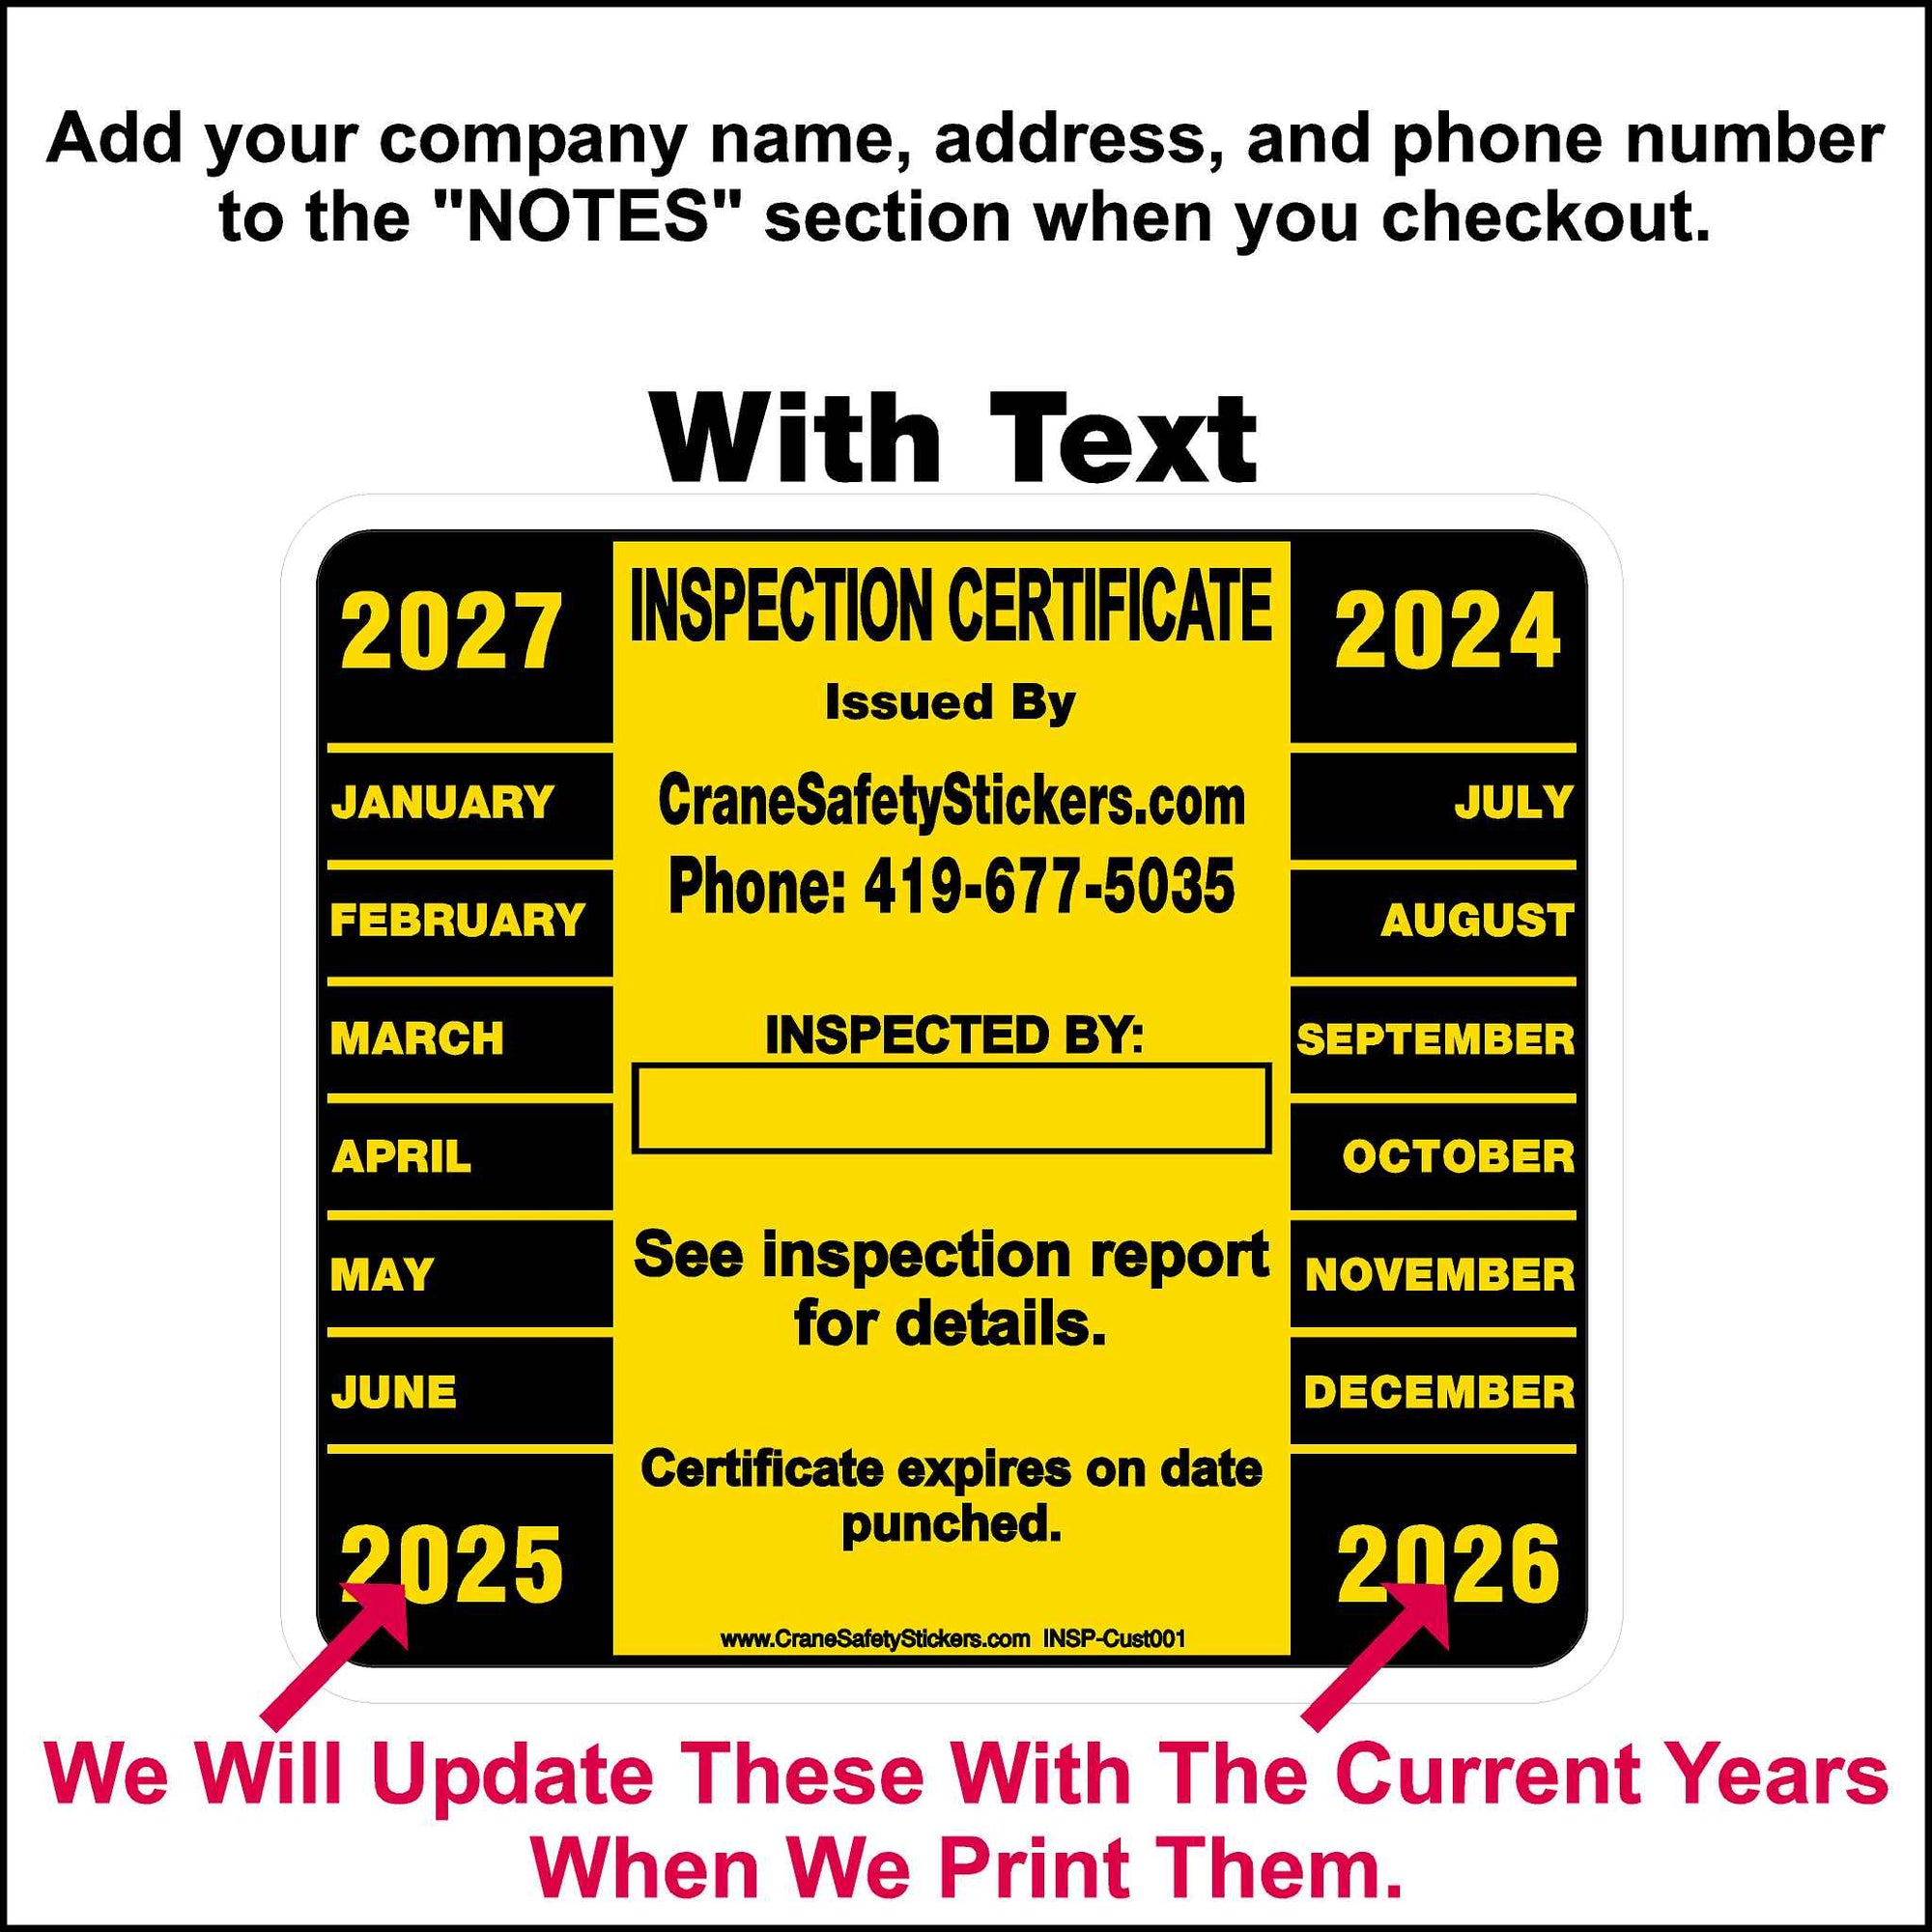 Custom Annual Inspection Sticker printed with your company name, address, and phone number. The Colors are yellow and black and it has all 12 months and 4 consecutive years printed in each corner. The user will punch a hole in the month and year the inspection is needed again.